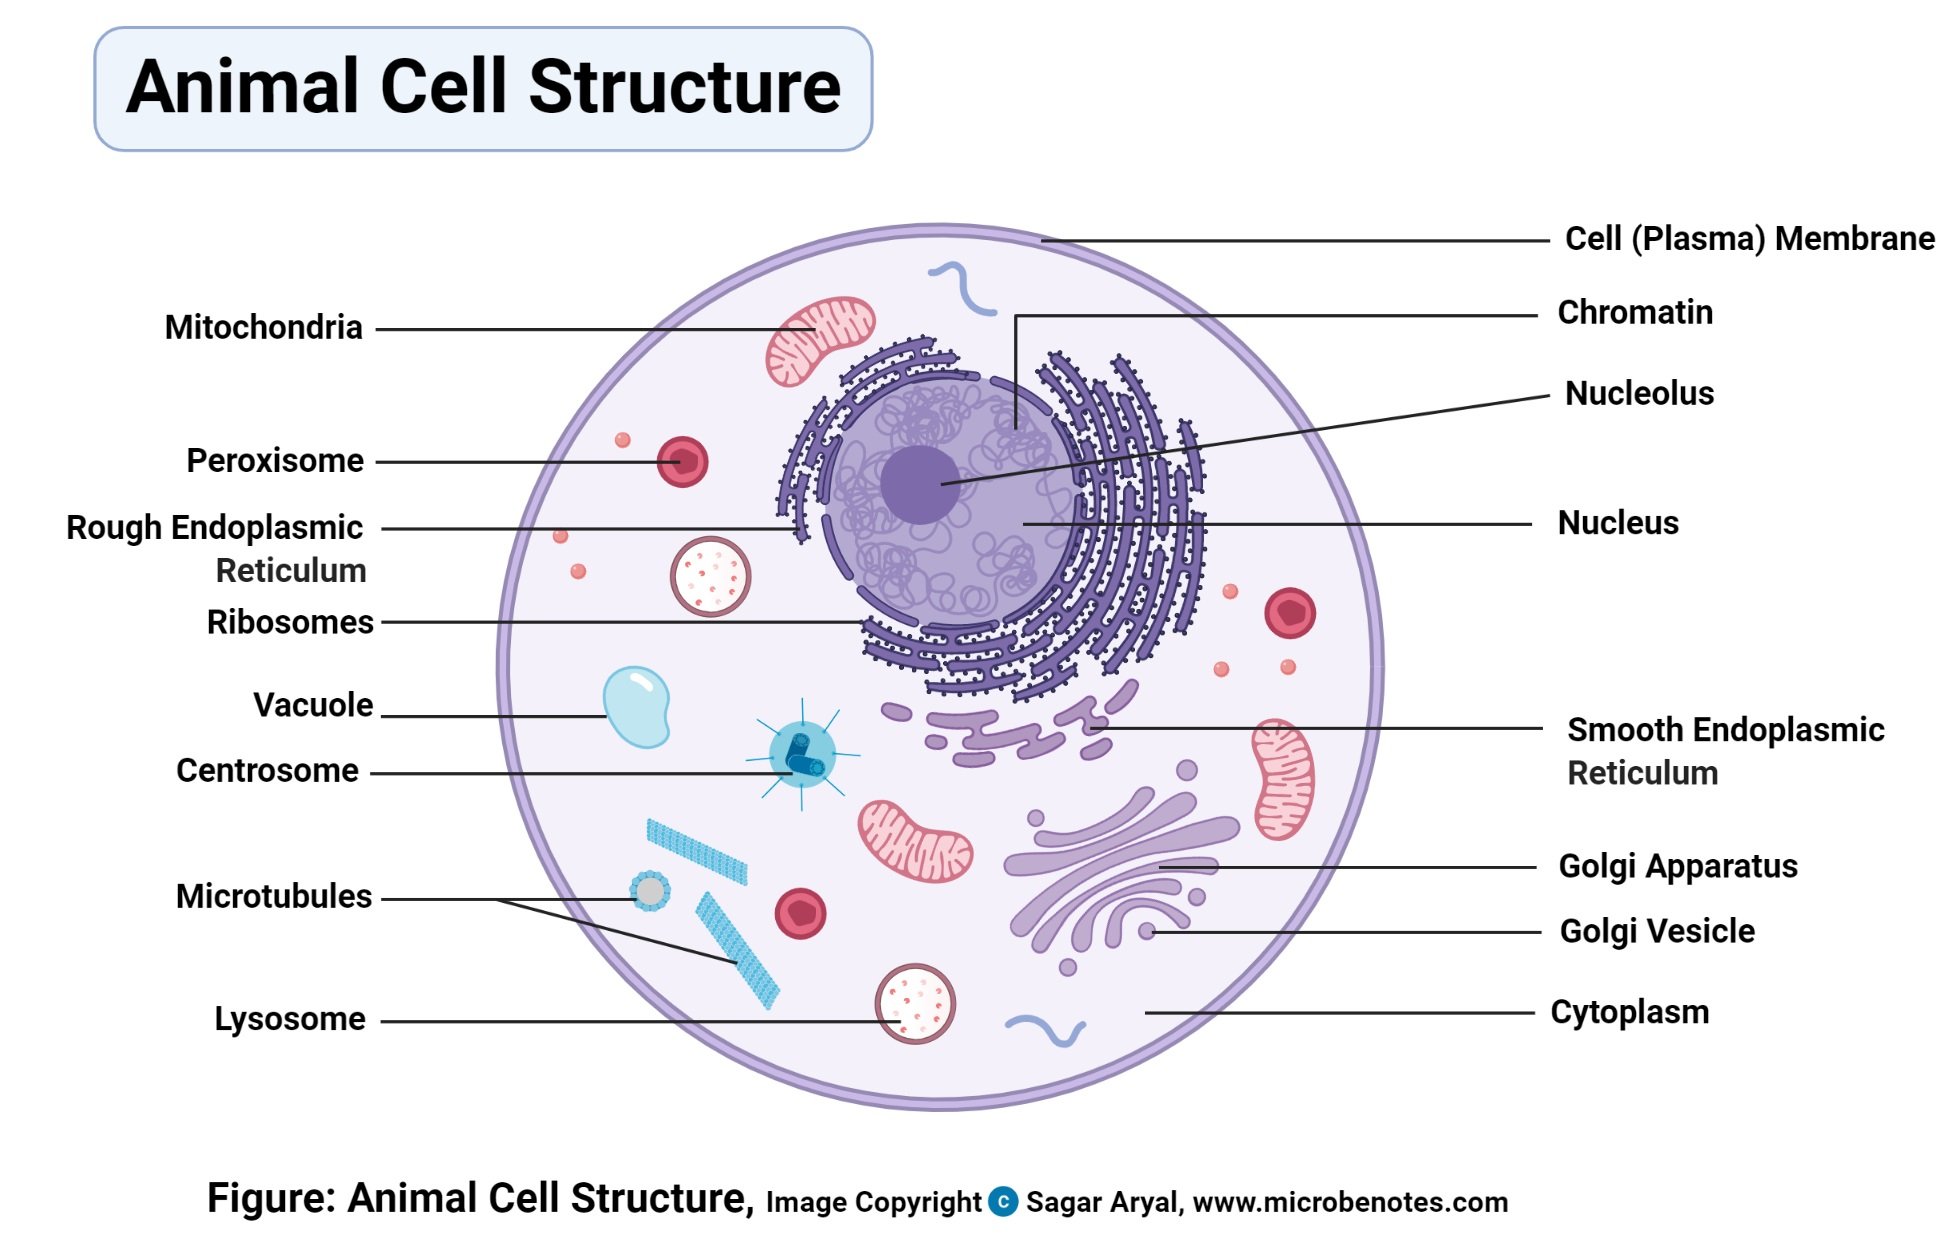 Draw An Animal Cell And Label Its Major Parts And Organelles Present Brainly